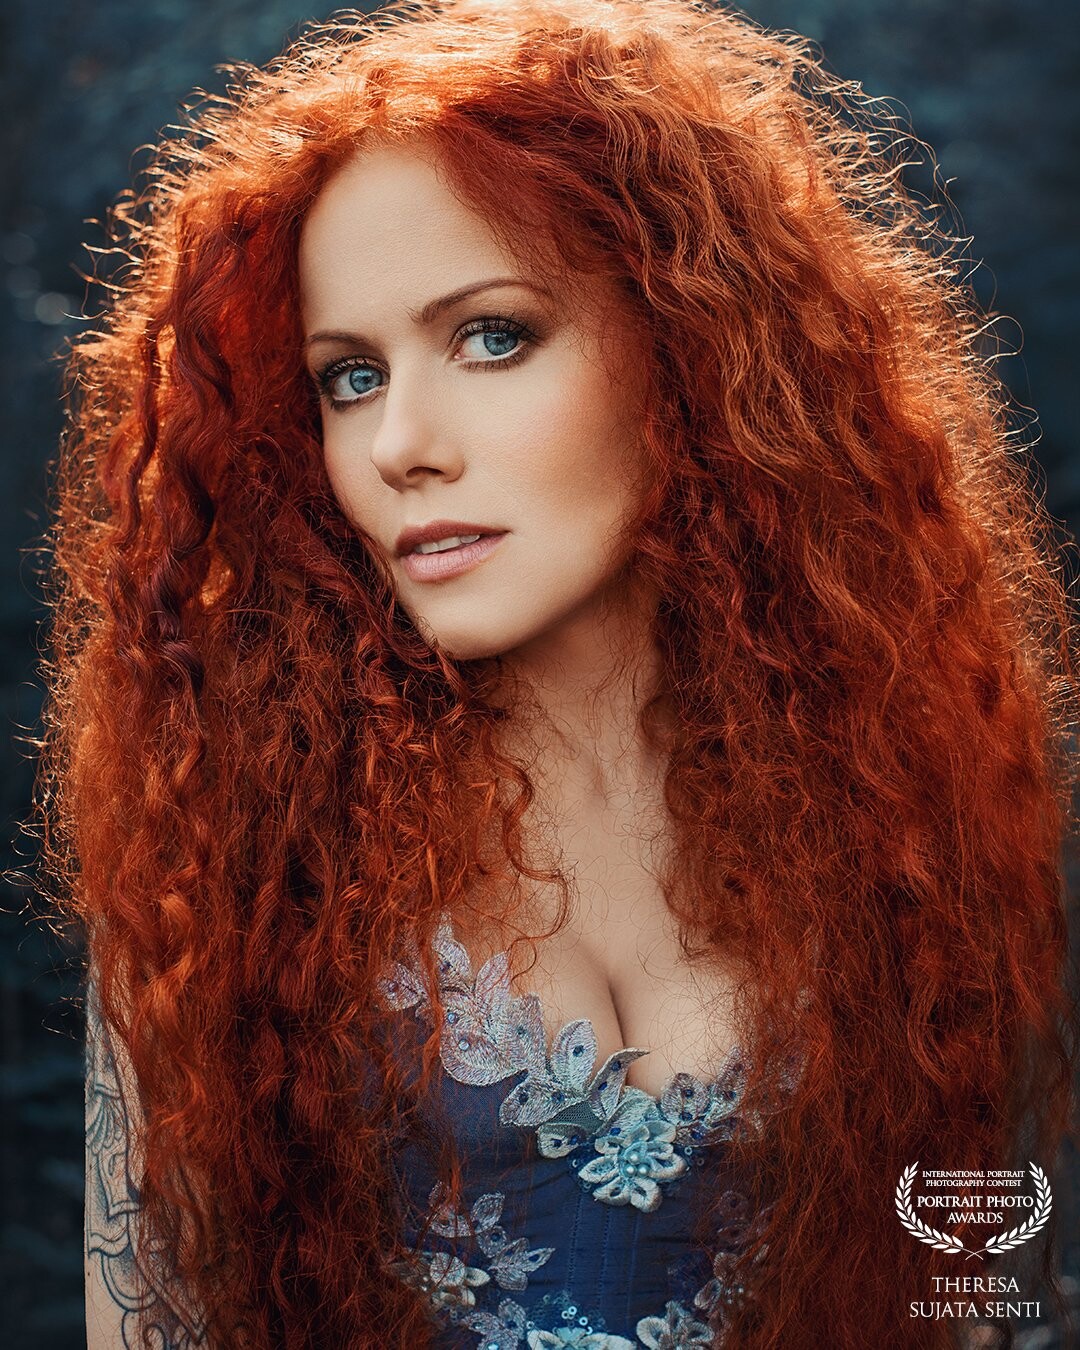 I had the pleasure to do a late-summer outdoor photoshoot with beautiful @lilium_noctum. We used the sun, which was already quite low, as backlight because it looks just perfect with her red hair. With makeup und hair done to perfection by @natalieweber_mua, the shot was just gorgeous!